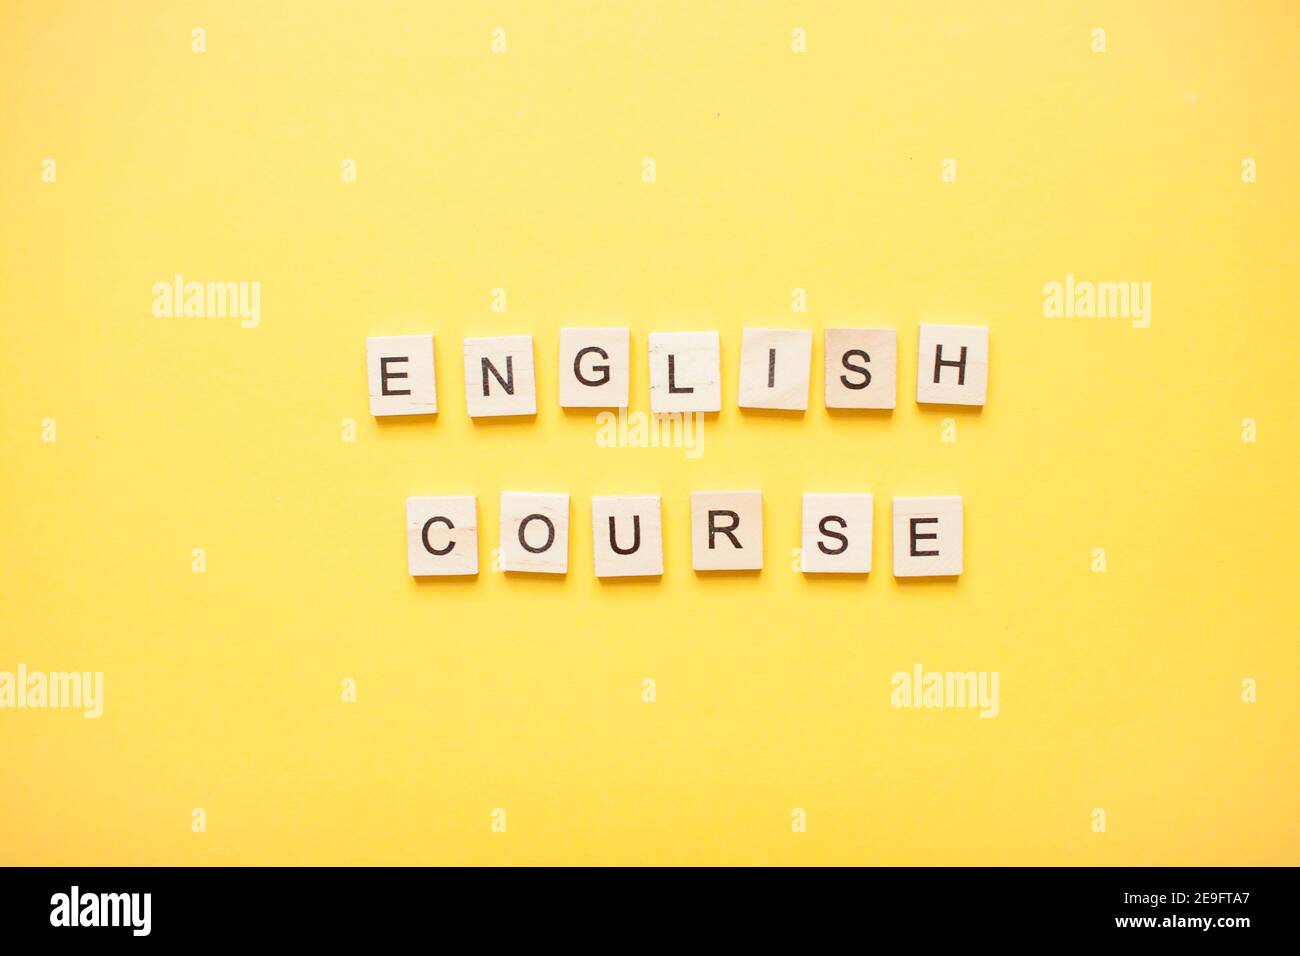 Phrase english course made from wooden blocks on a light yellow background Stock Photo